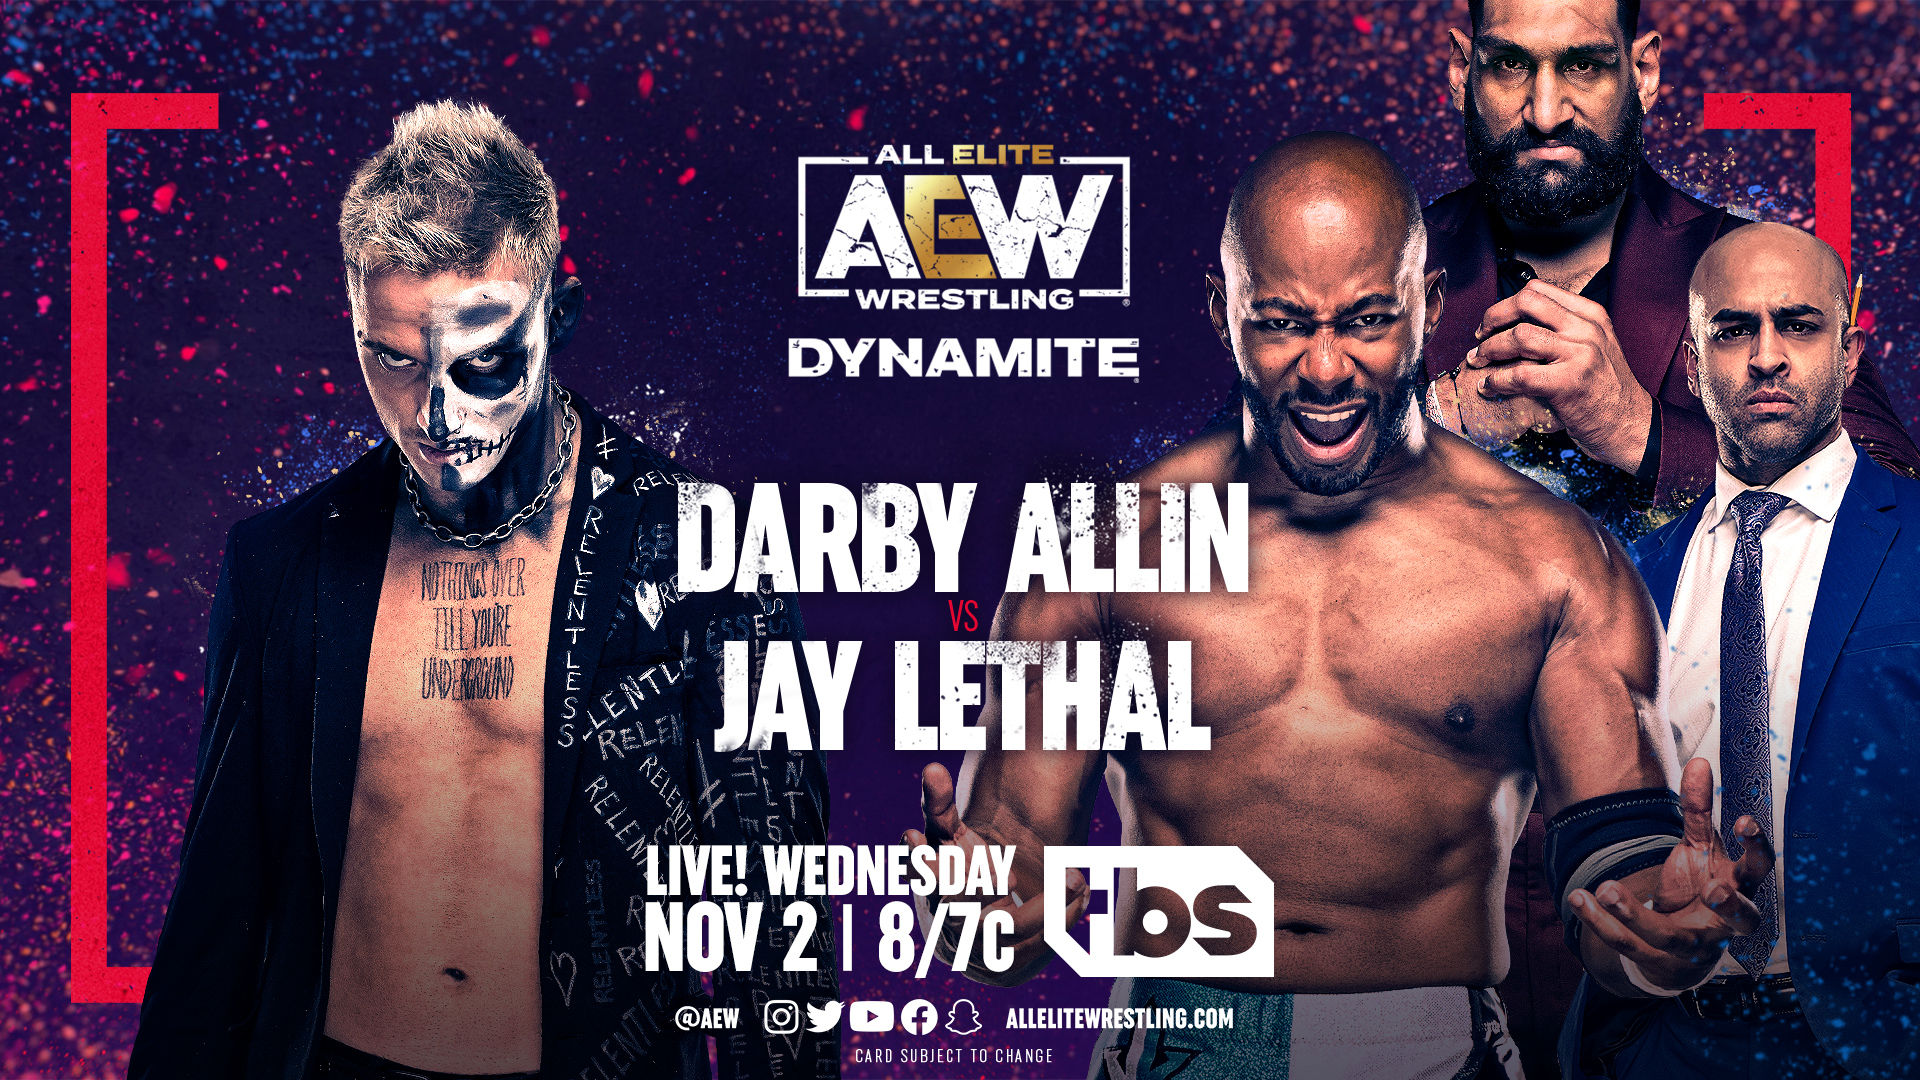 All Elite Wrestling on Twitter: ".@DarbyAllin is seeking more than just revenge against @TheLethalJay when they collide once again THIS WEDNESDAY at #AEWDynamite 8pm ET/7pm CT on @TBSNetwork! https://t.co/nTa7FufRMS" / Twitter